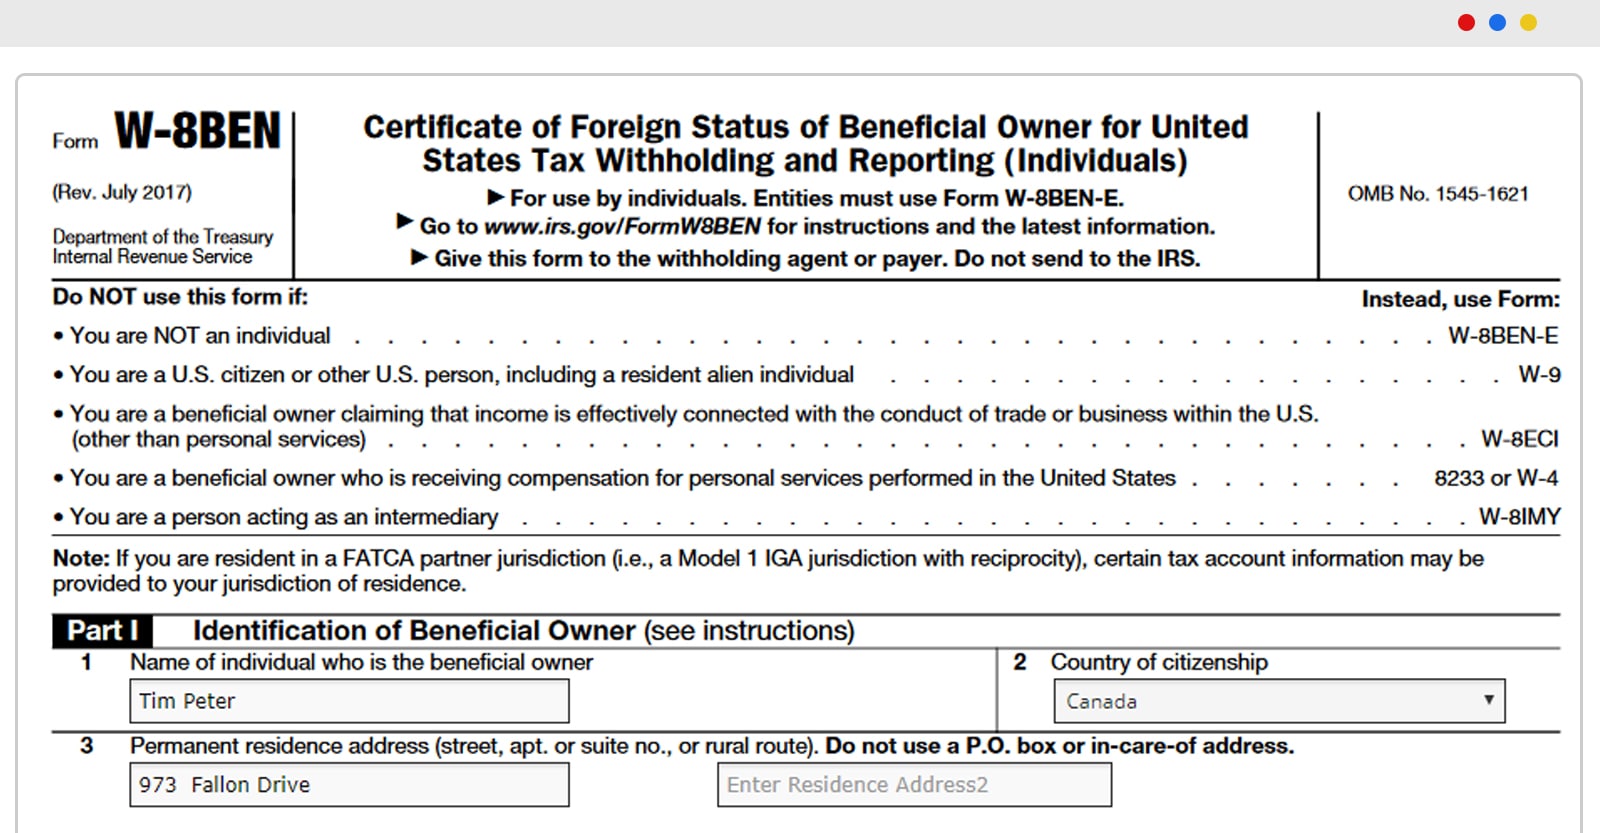 Review the Form W-8BEN